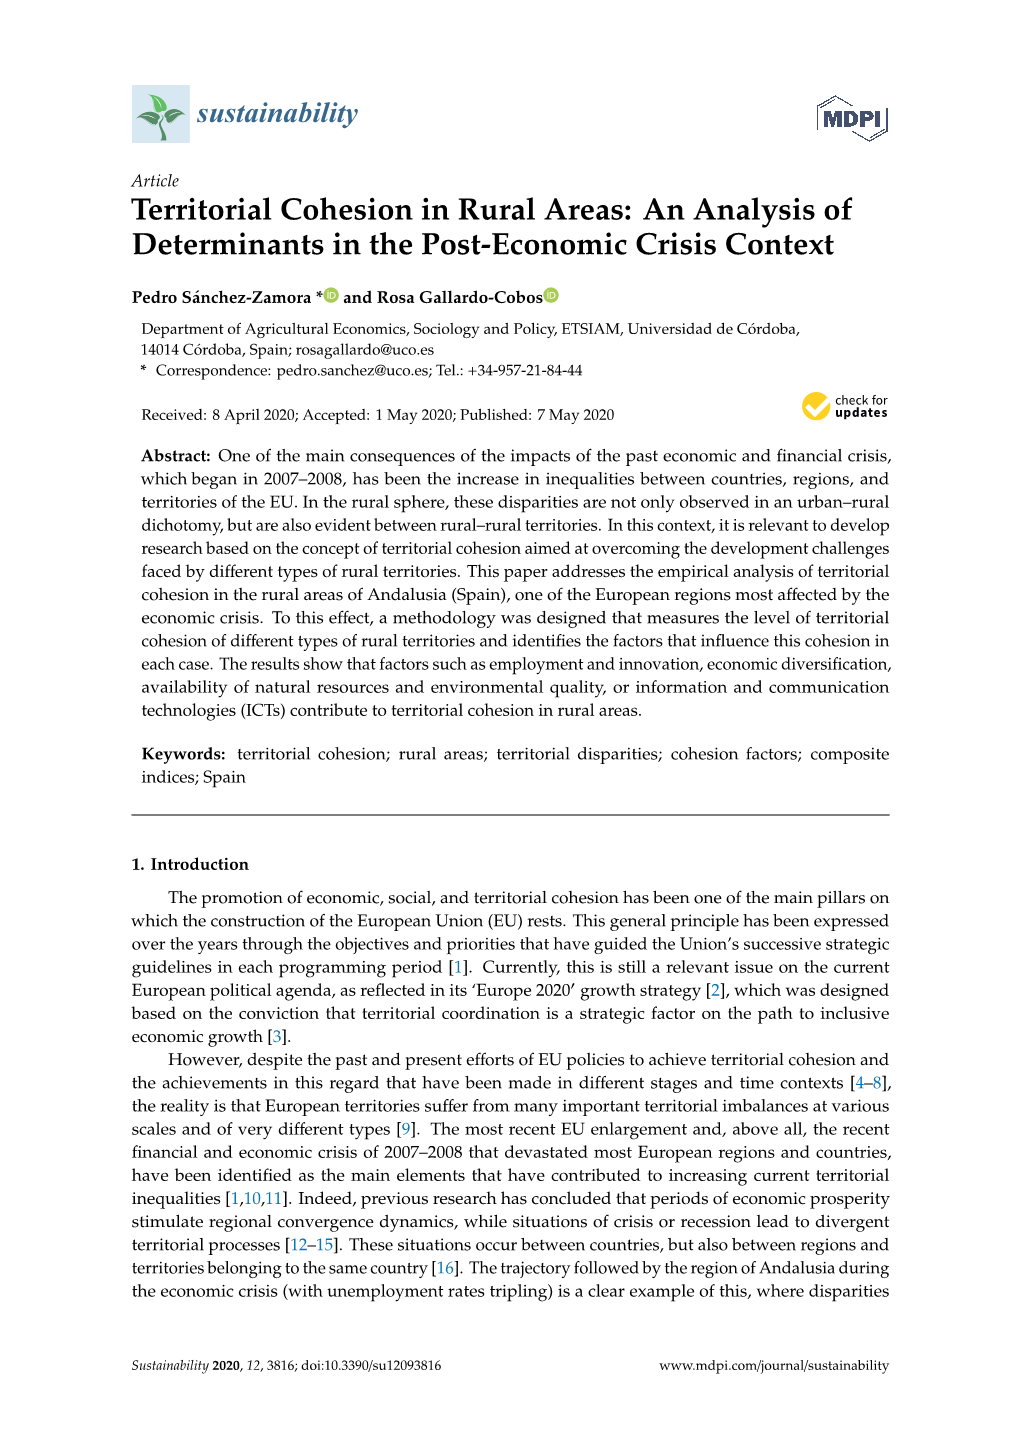 Territorial Cohesion in Rural Areas: an Analysis of Determinants in the Post-Economic Crisis Context